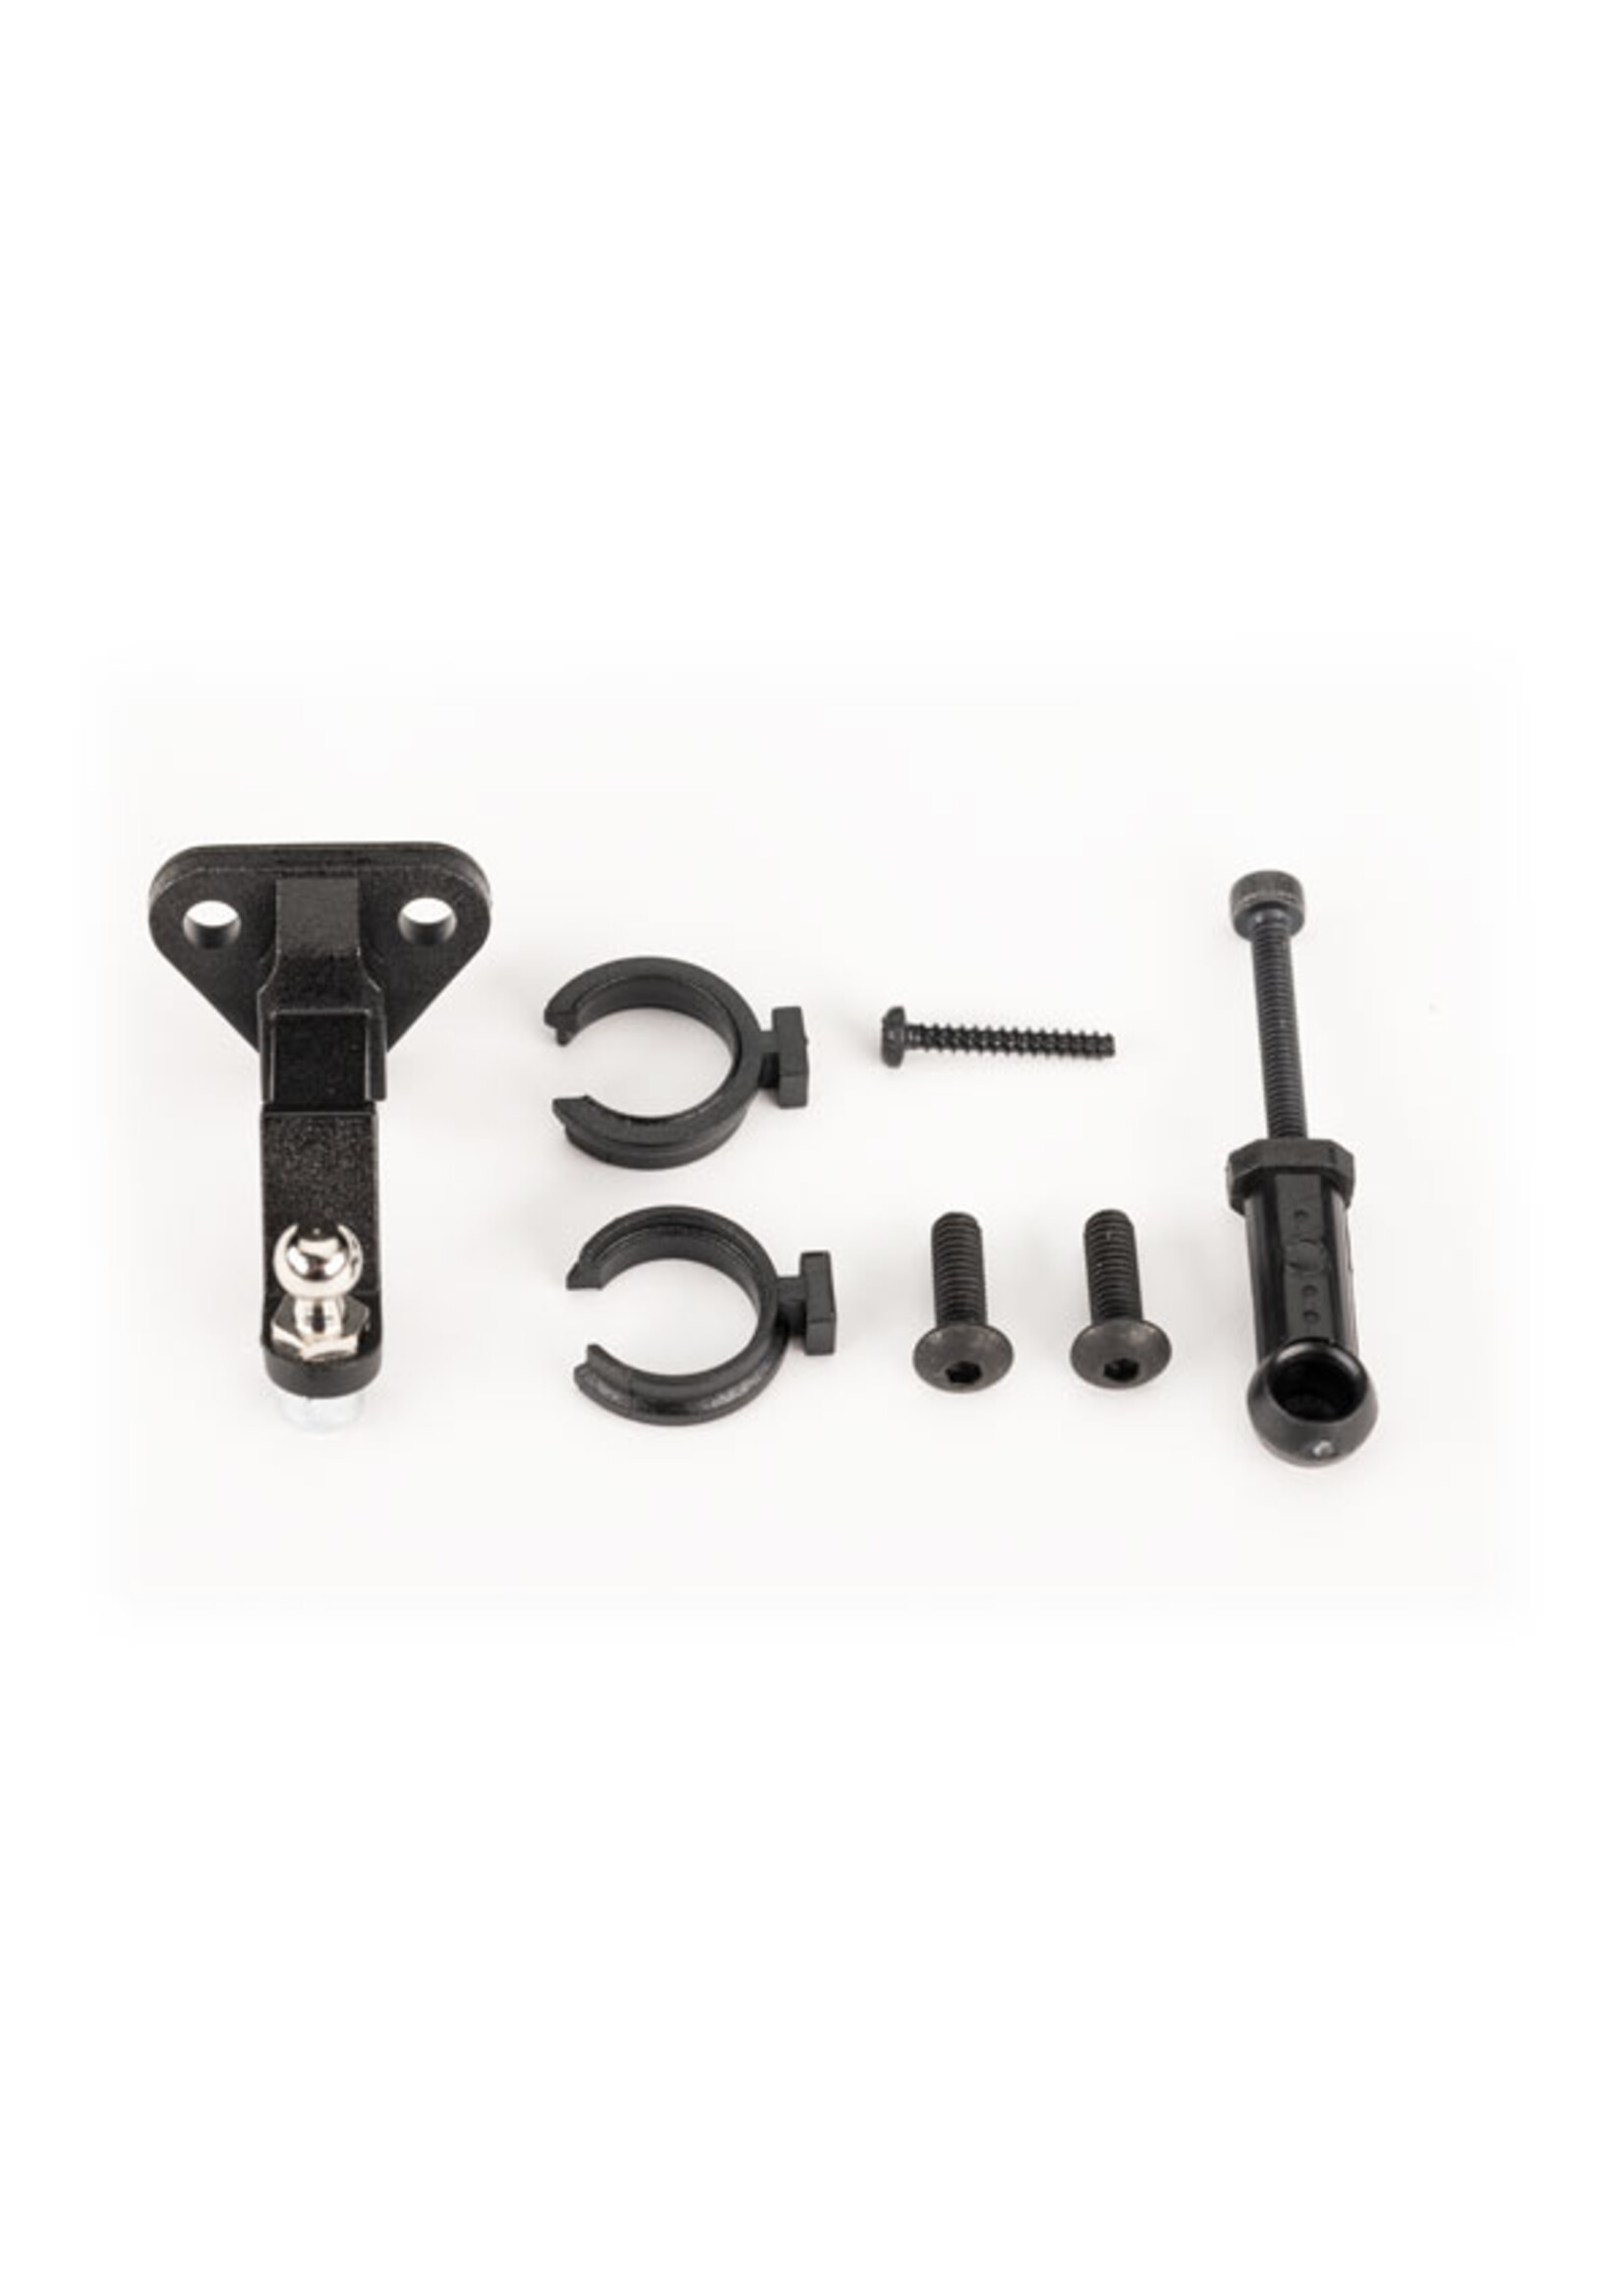 Traxxas 9796 - Trailer Hitch, Couplers & Spacers